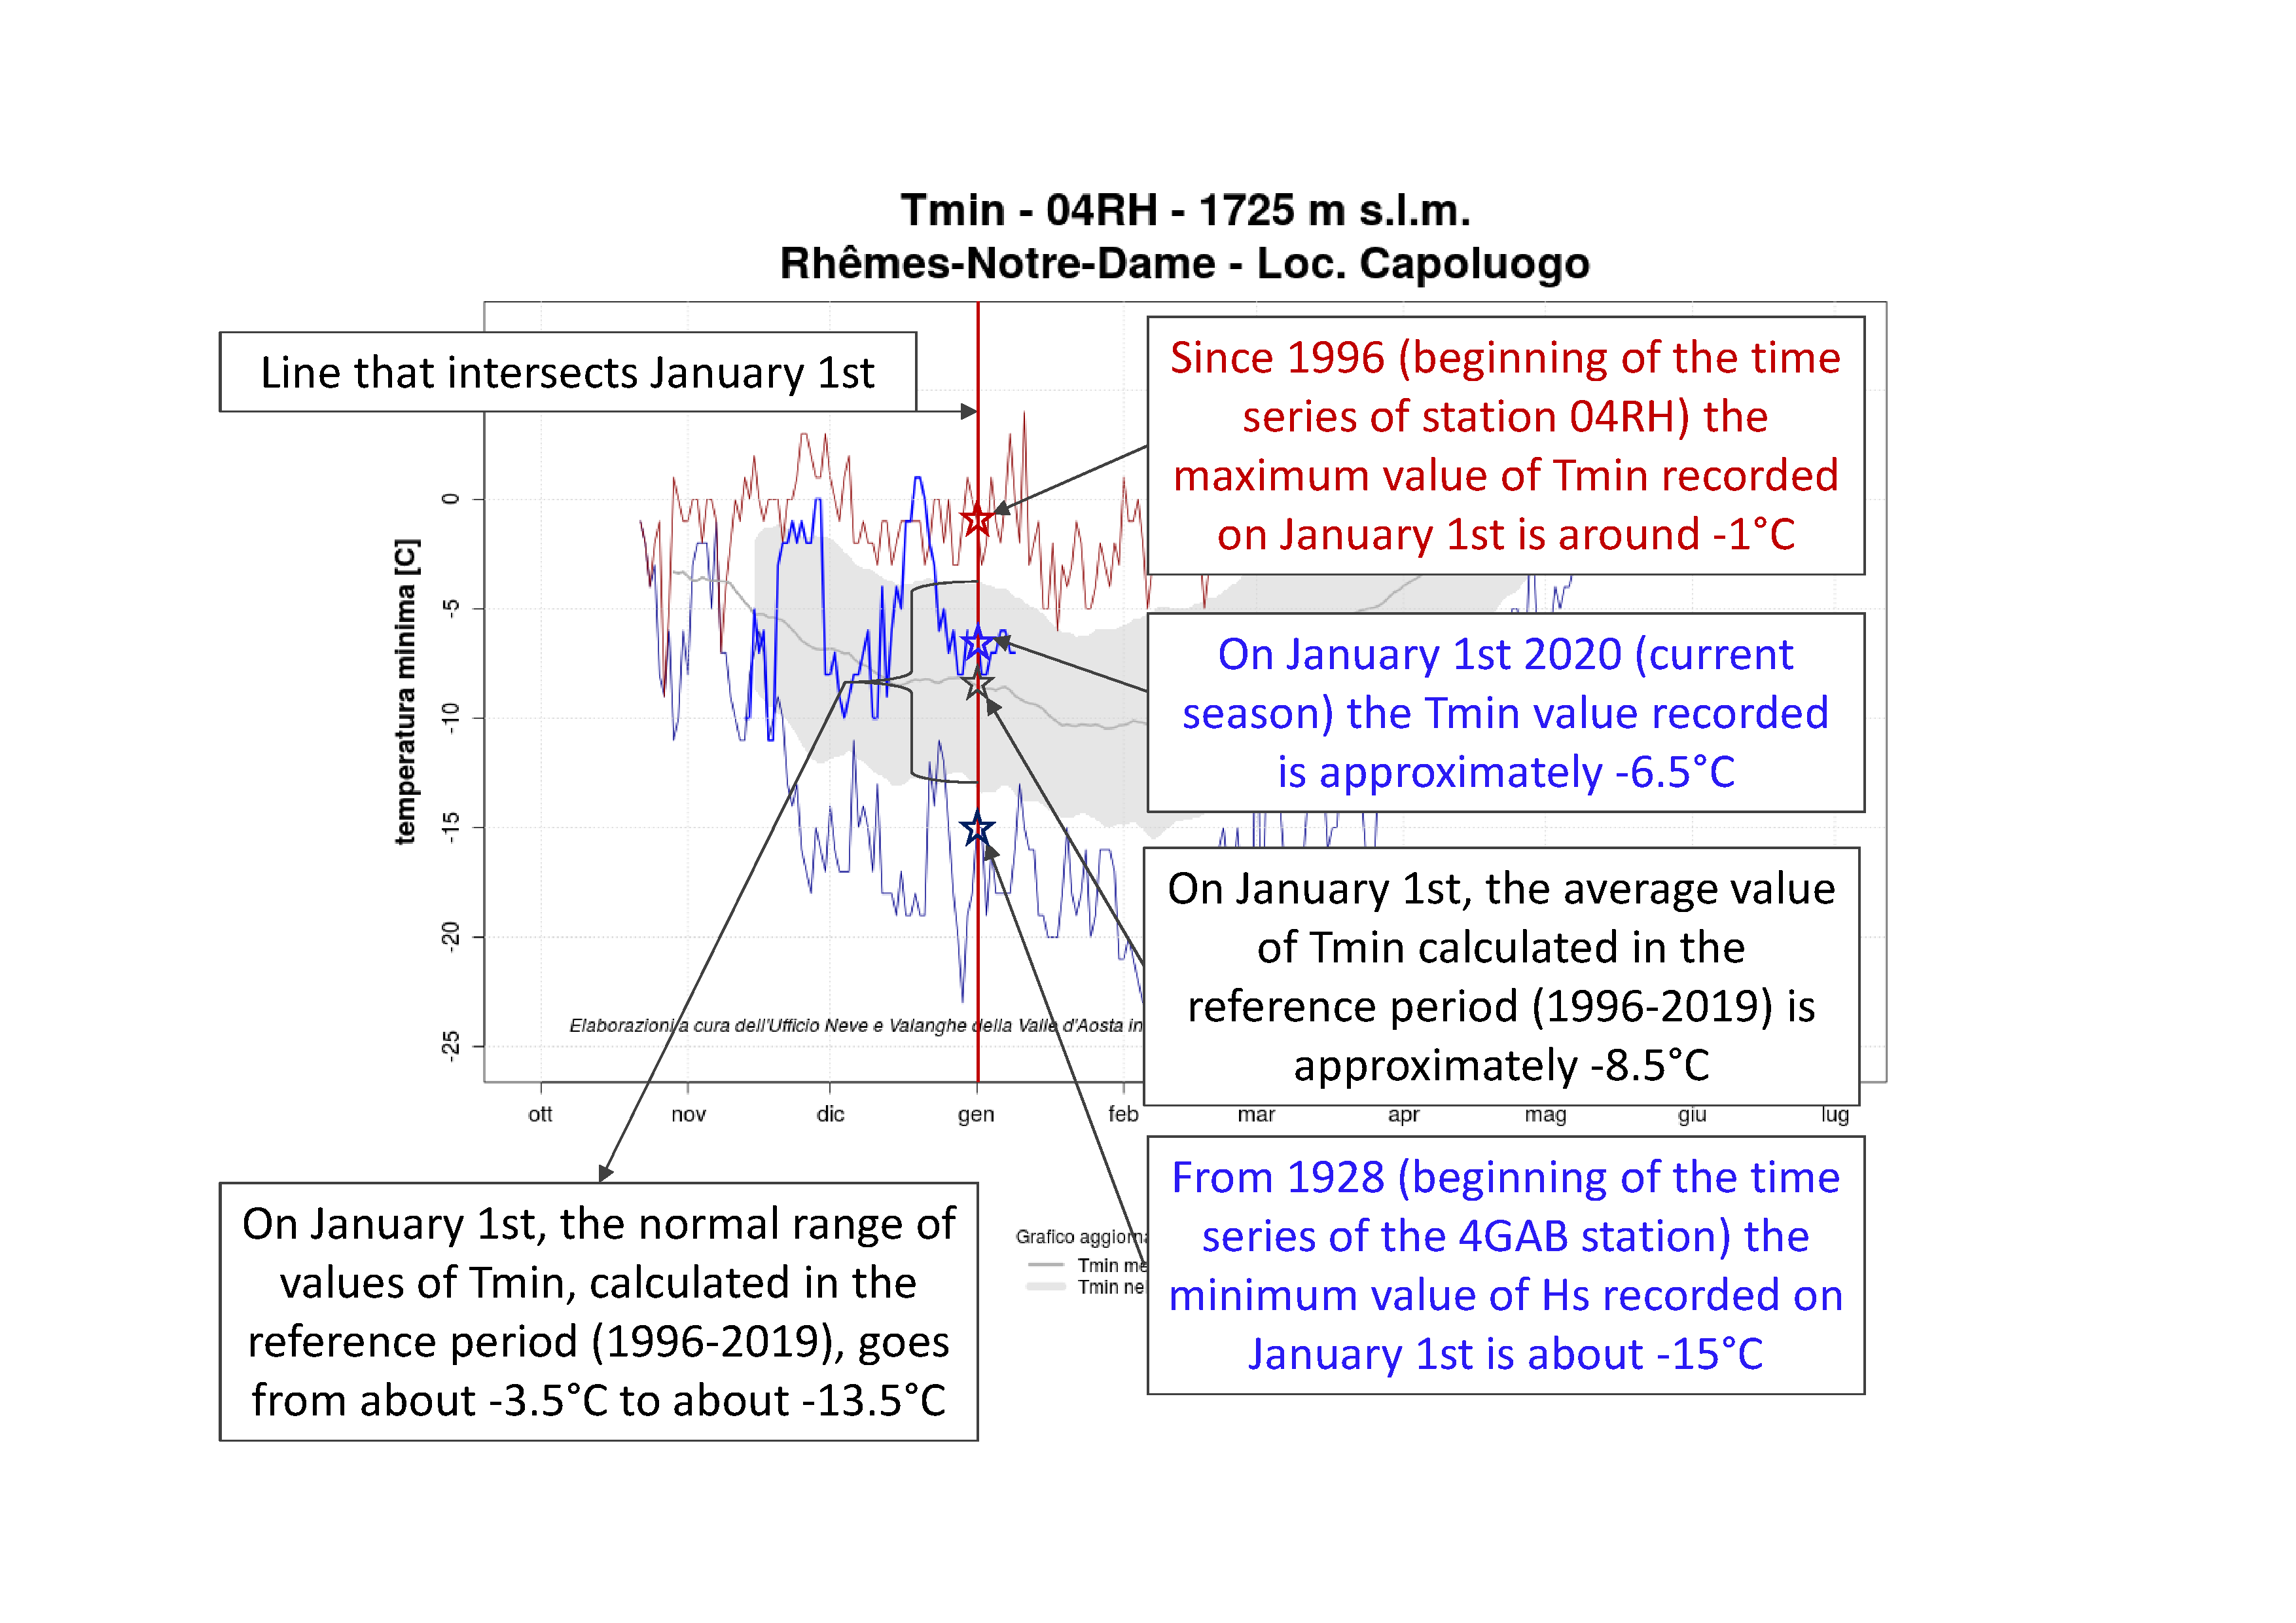 Figure 3: some information that can be obtained from a Minimum Temperature Graph - Historical Series, analysing a specific day, in the example January 1st.